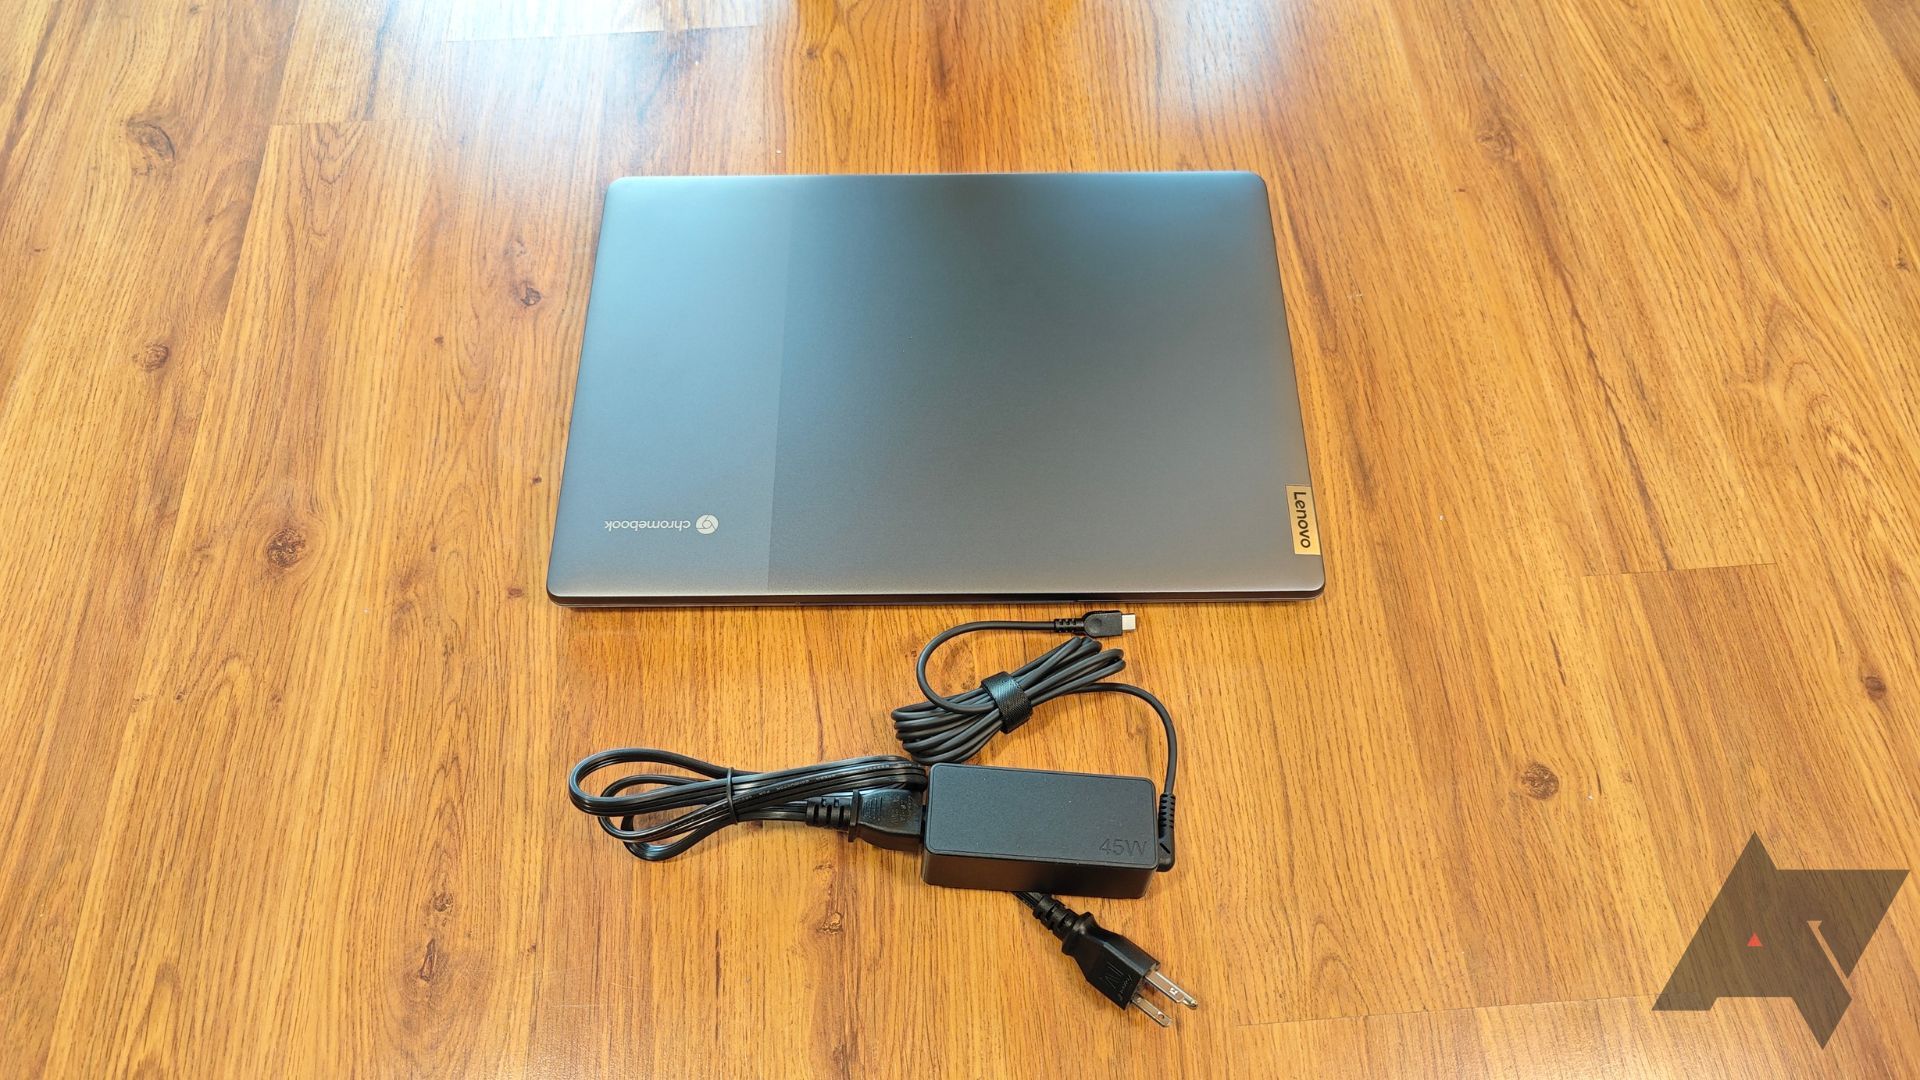 A Lenovo IdeaPad 5i Chromebook on a wooden floor with it's charger in front of it